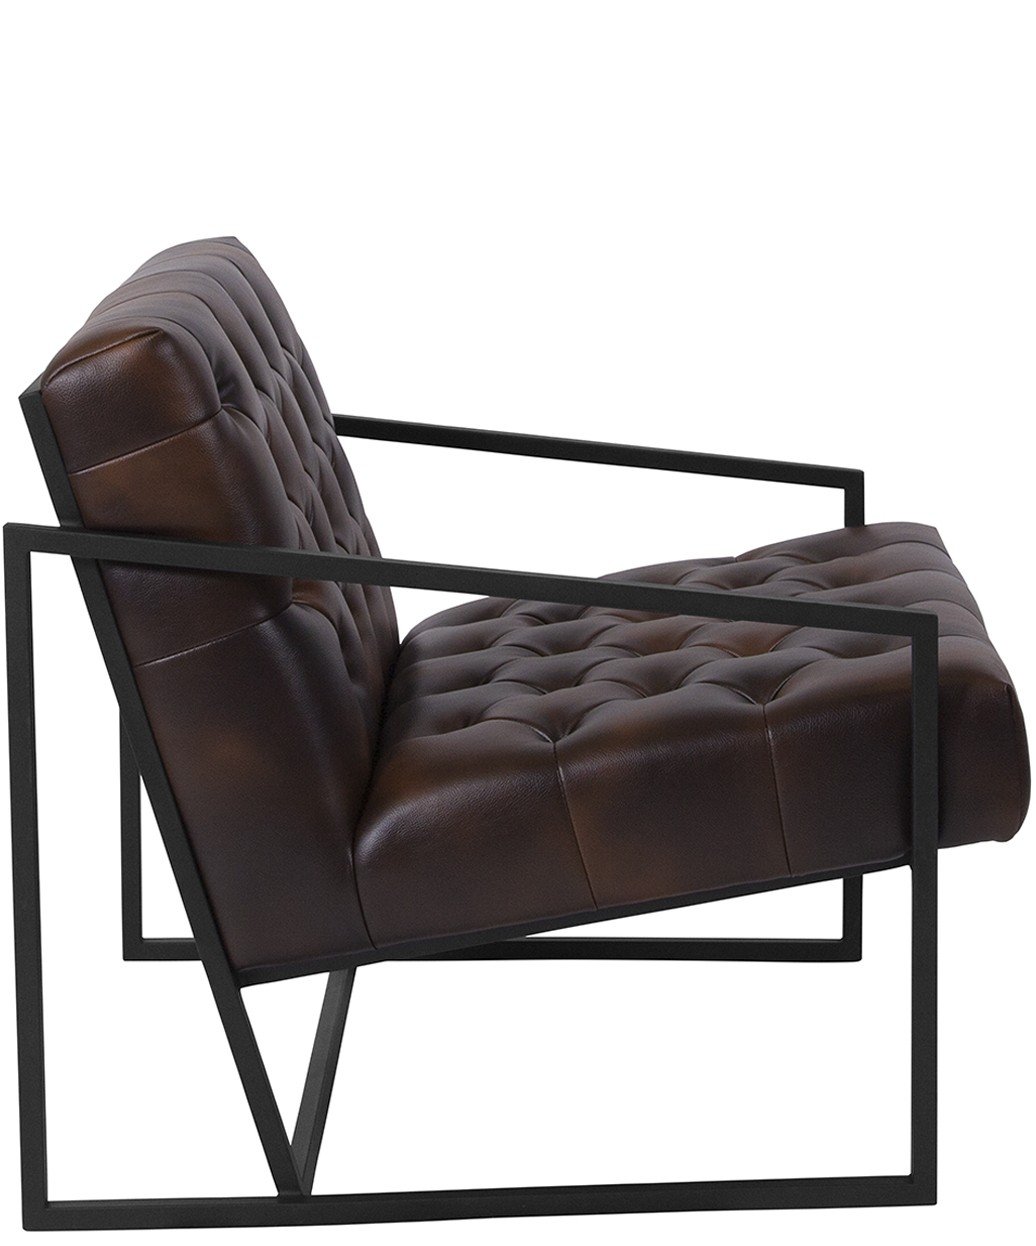 Keane Tufted Leather Chair w/ Metal Frame